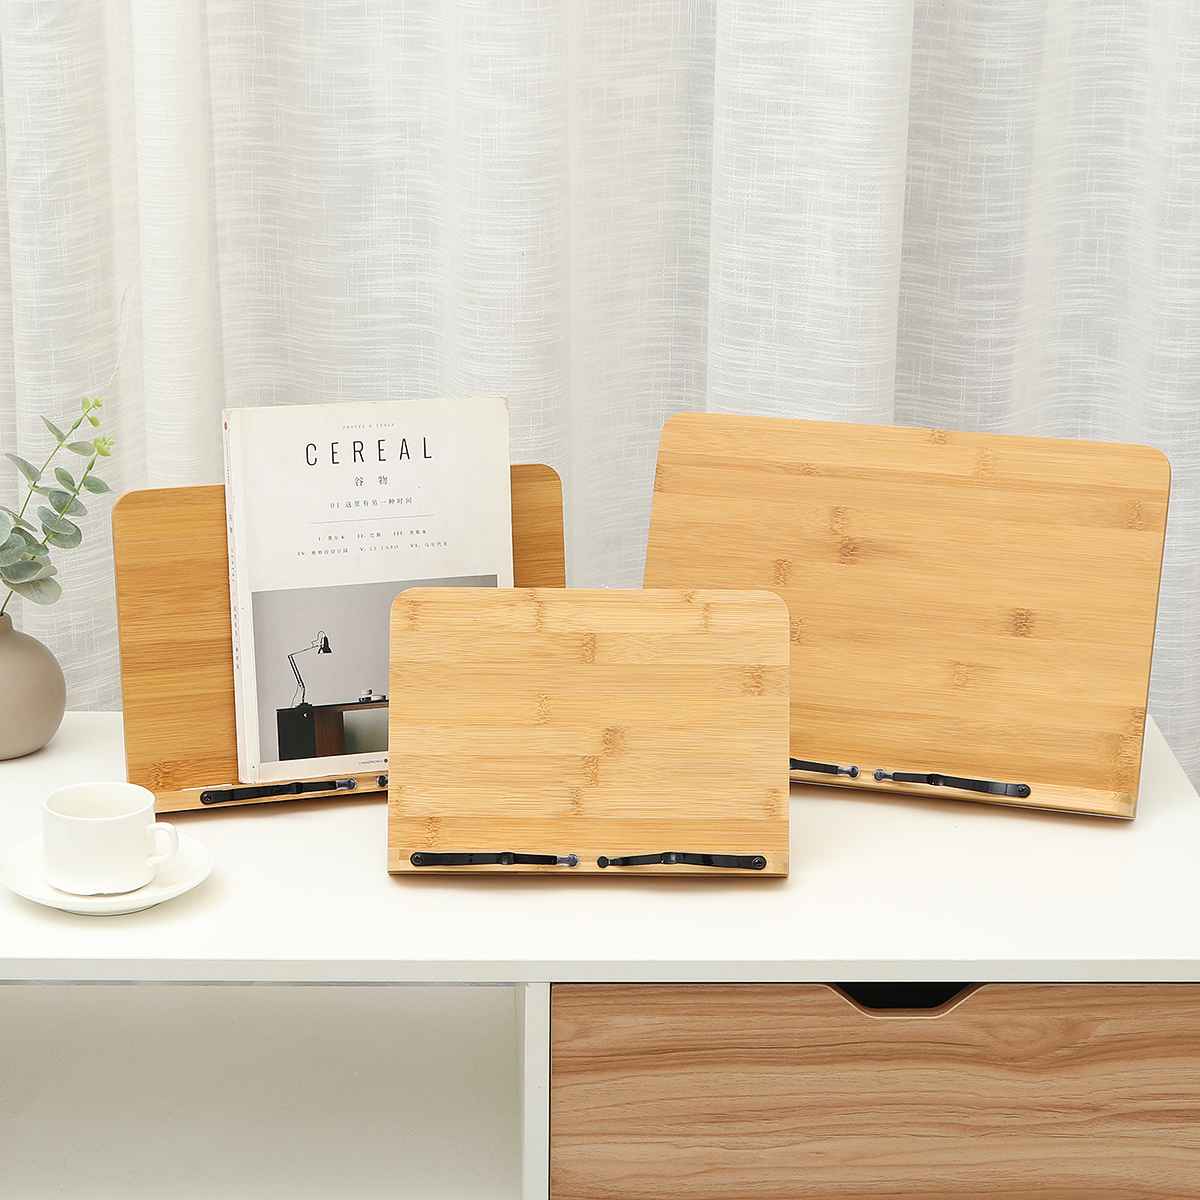 5 Levels of Height Adjustment Reading Rest Tablet Cook Home Study Room Book Holder Foldable Cookbook Stand Pages Fixed Bamboo